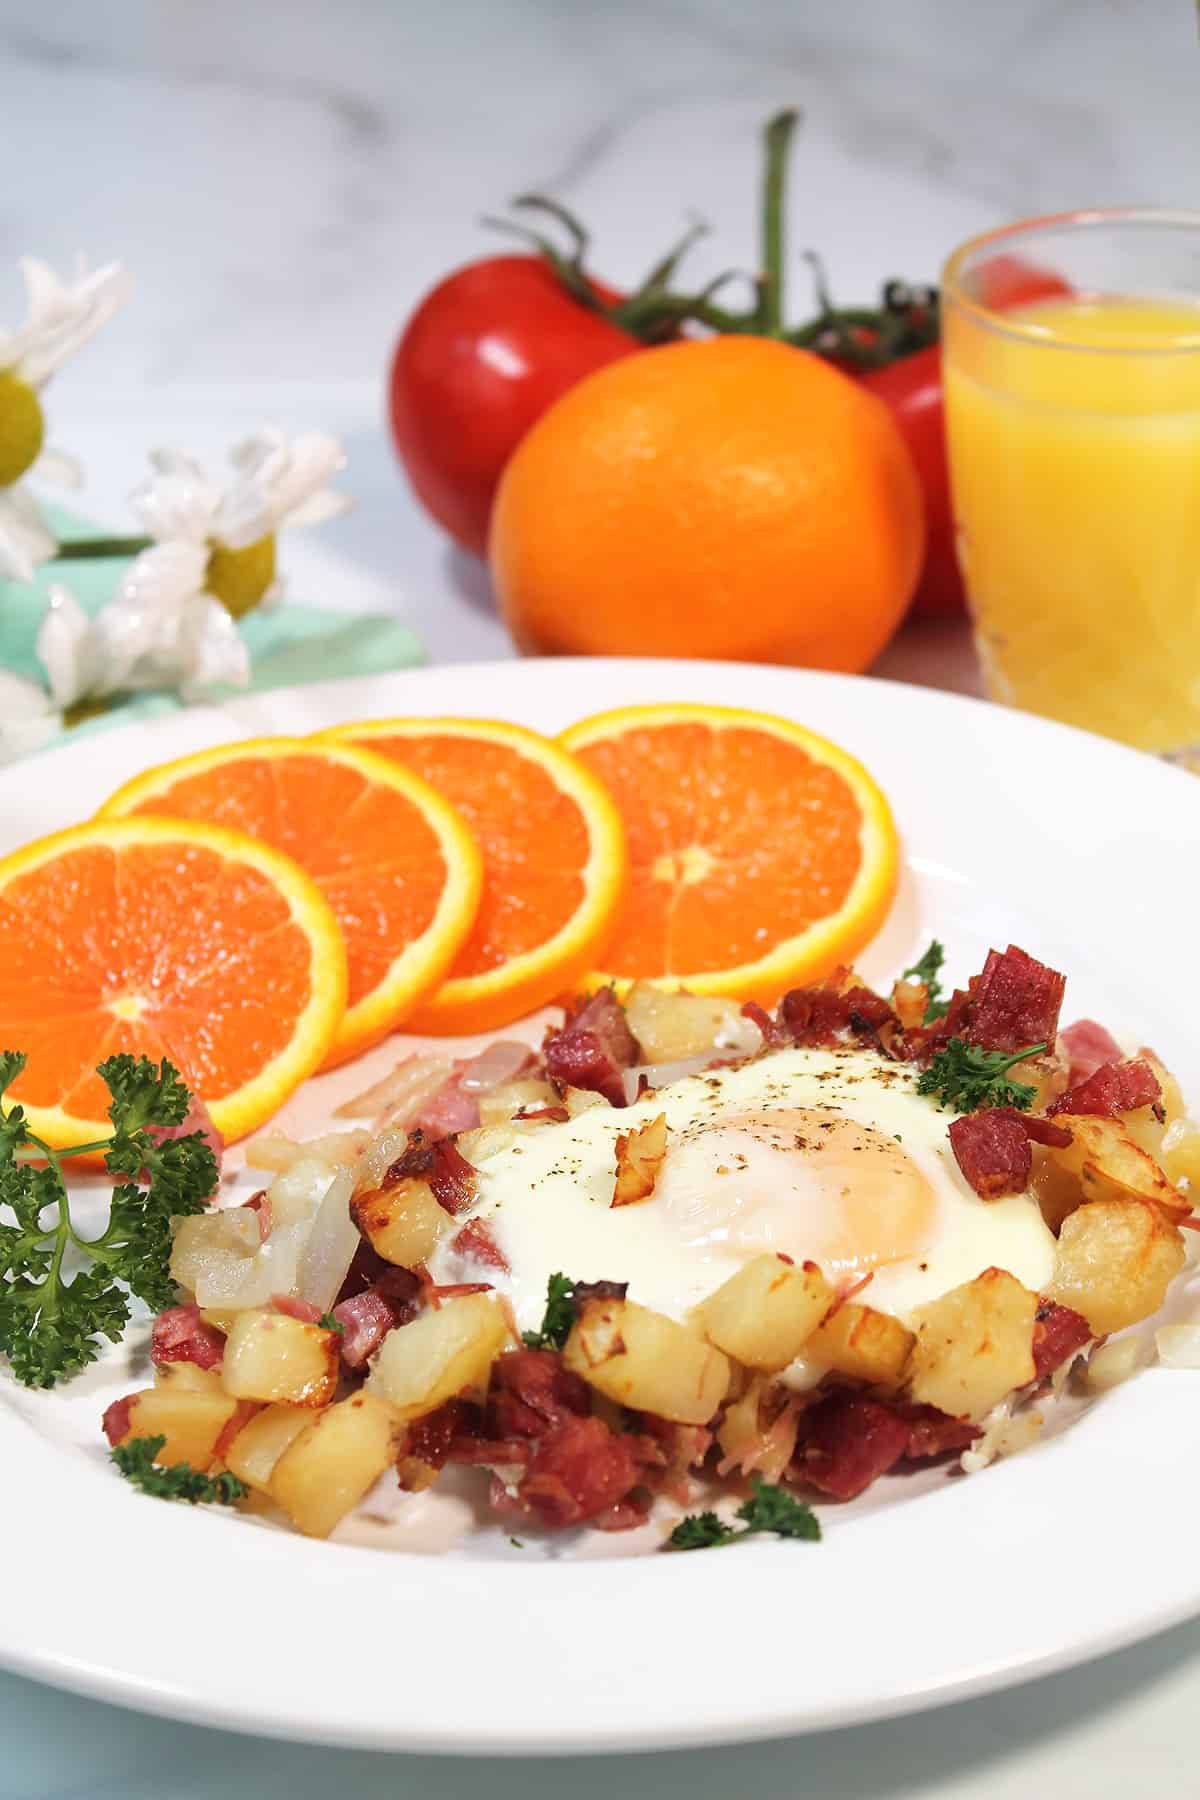 Plated Corned Beef Hash and eggs with orange slices and orange juice.